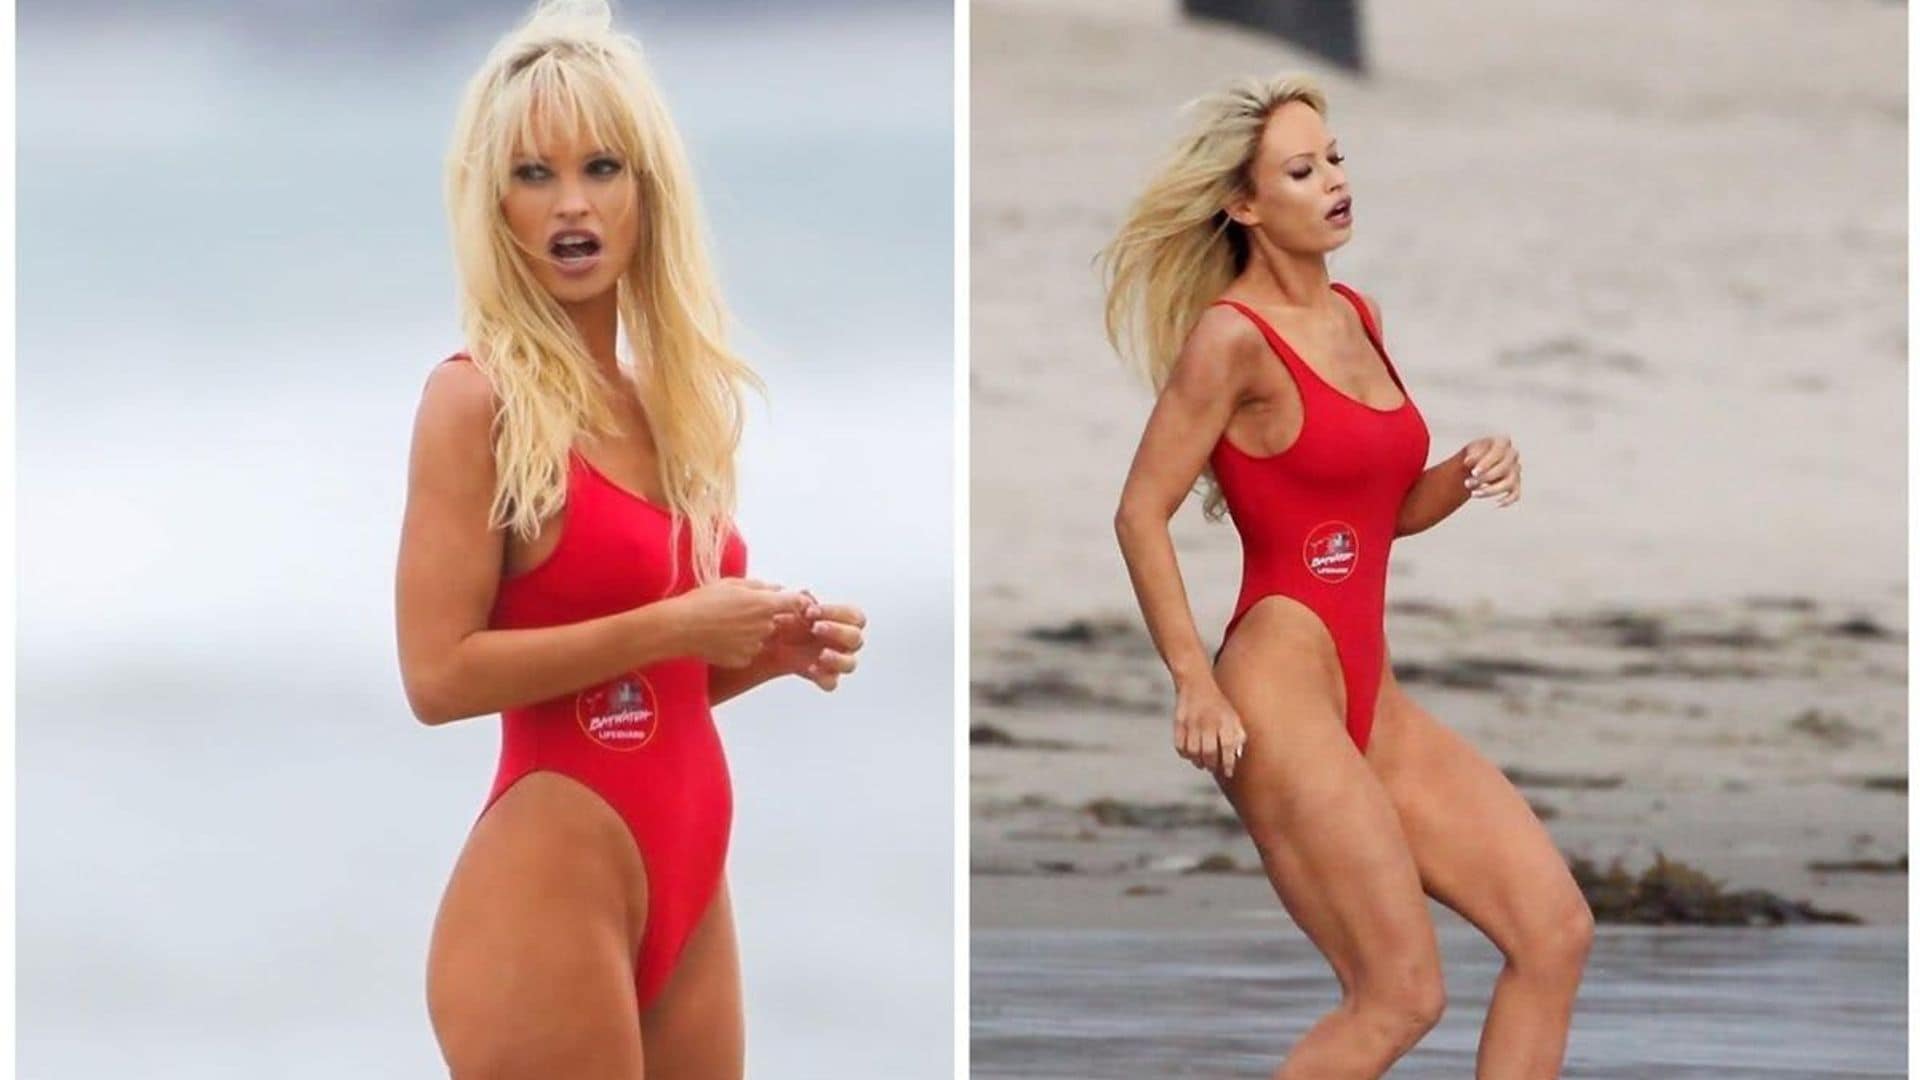 Lily James as Pamela Anderson in her red ‘Baywatch’ bathing suit has everyone excited but Courtney Love